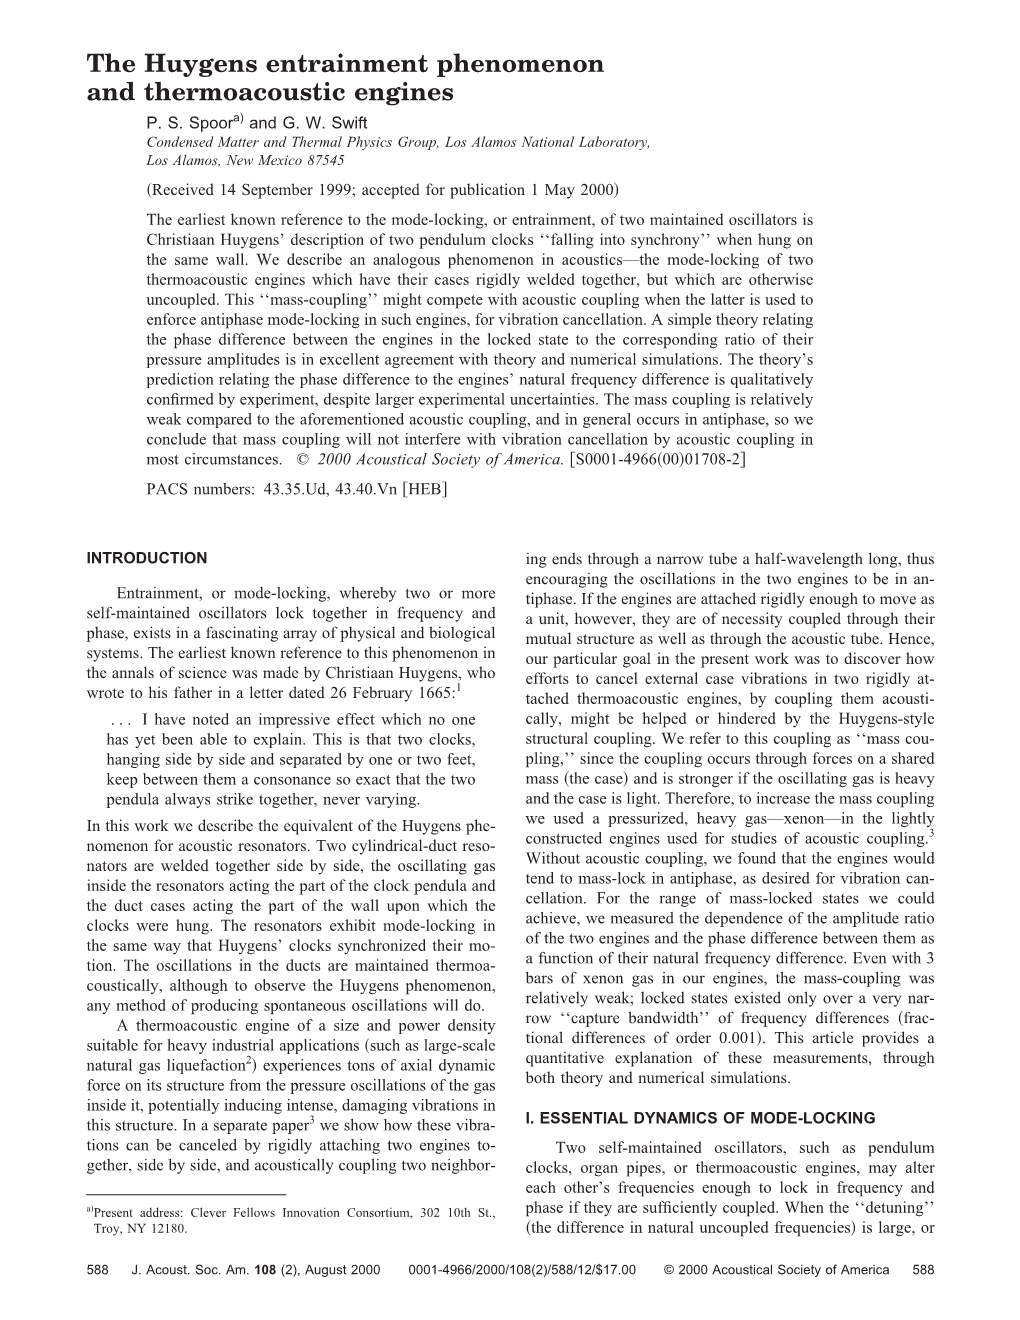 The Huygens Entrainment Phenomenon and Thermoacoustic Engines P